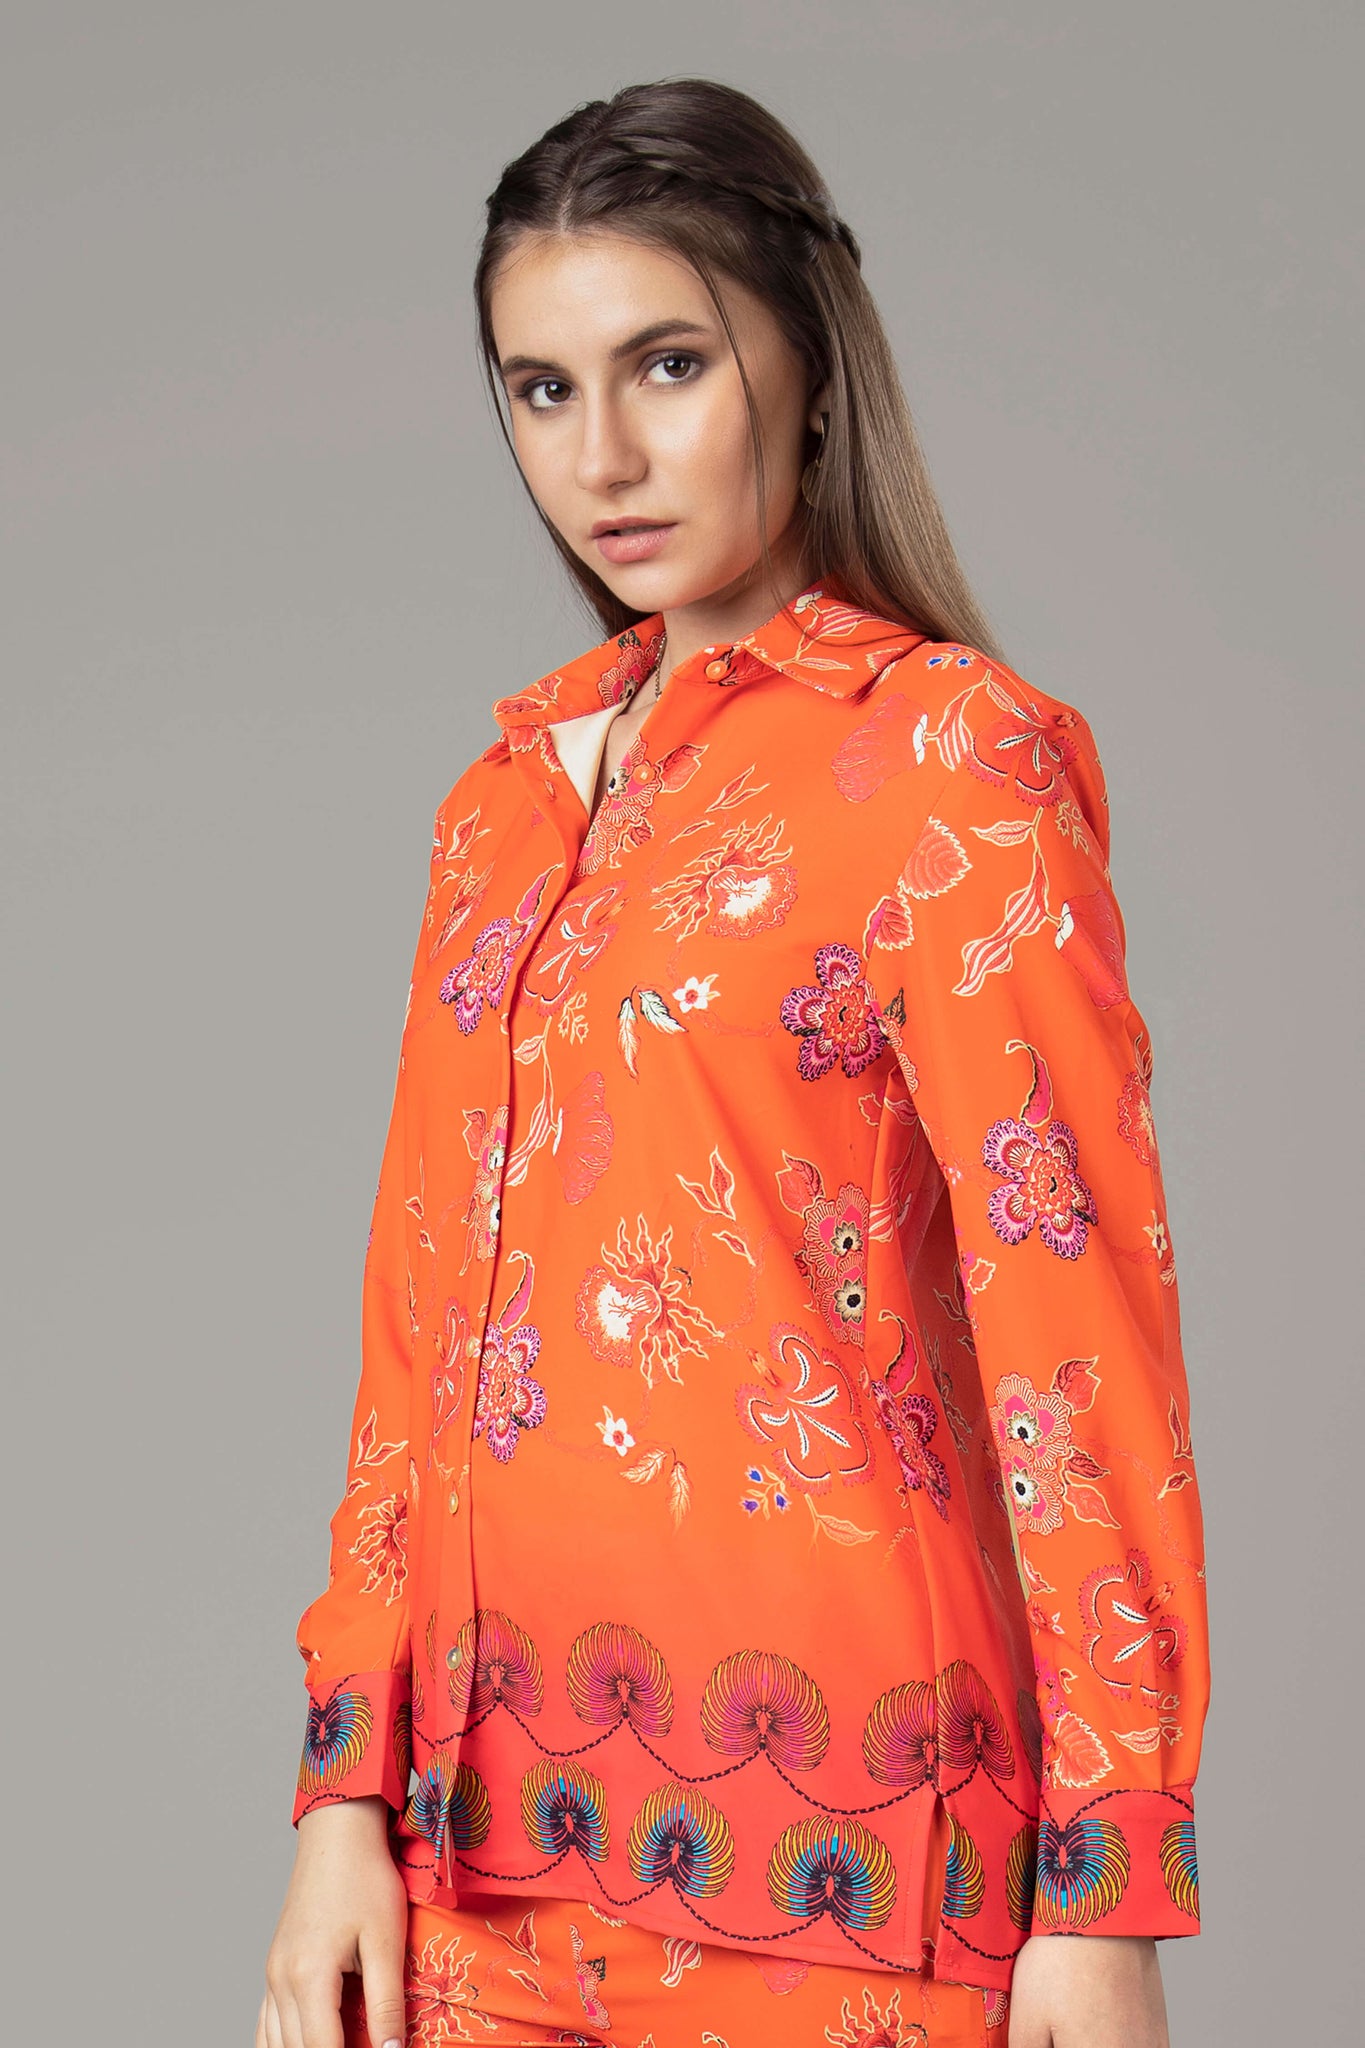 Trendy Floral Spread Collar Shirt For Women